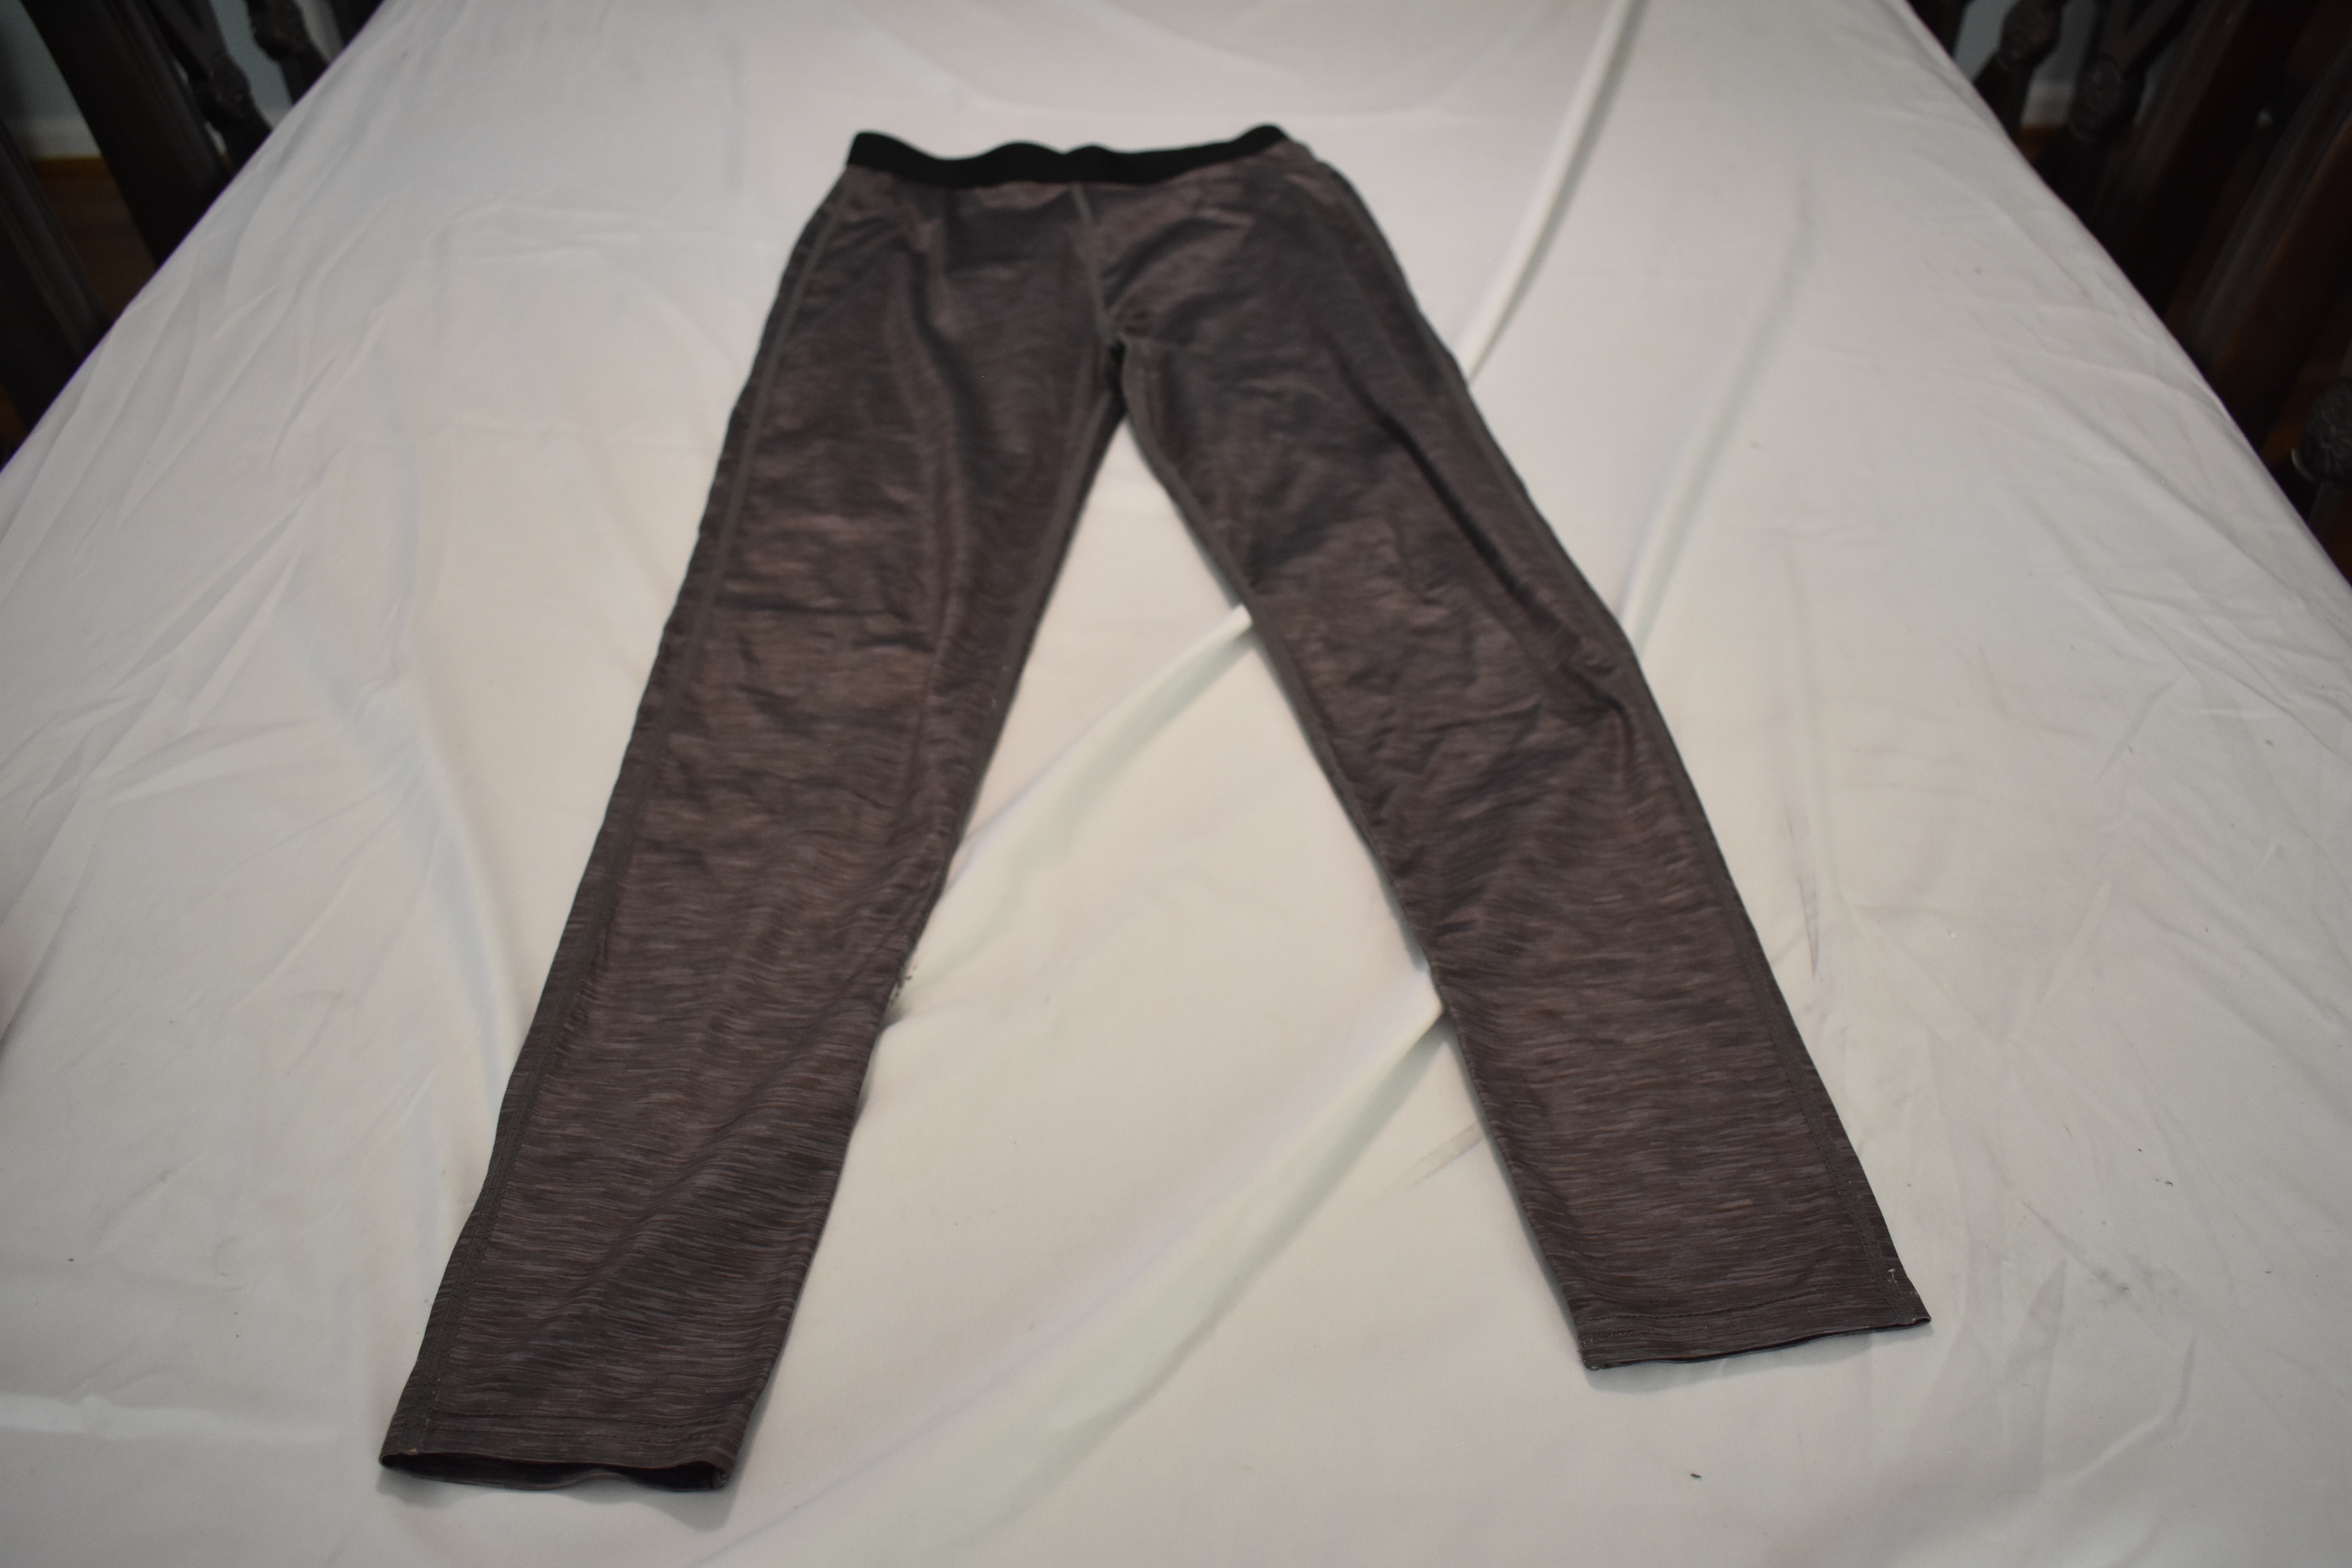 Athletic Works Stretch Pants/Tights, Gray, Medium - Great Condition!